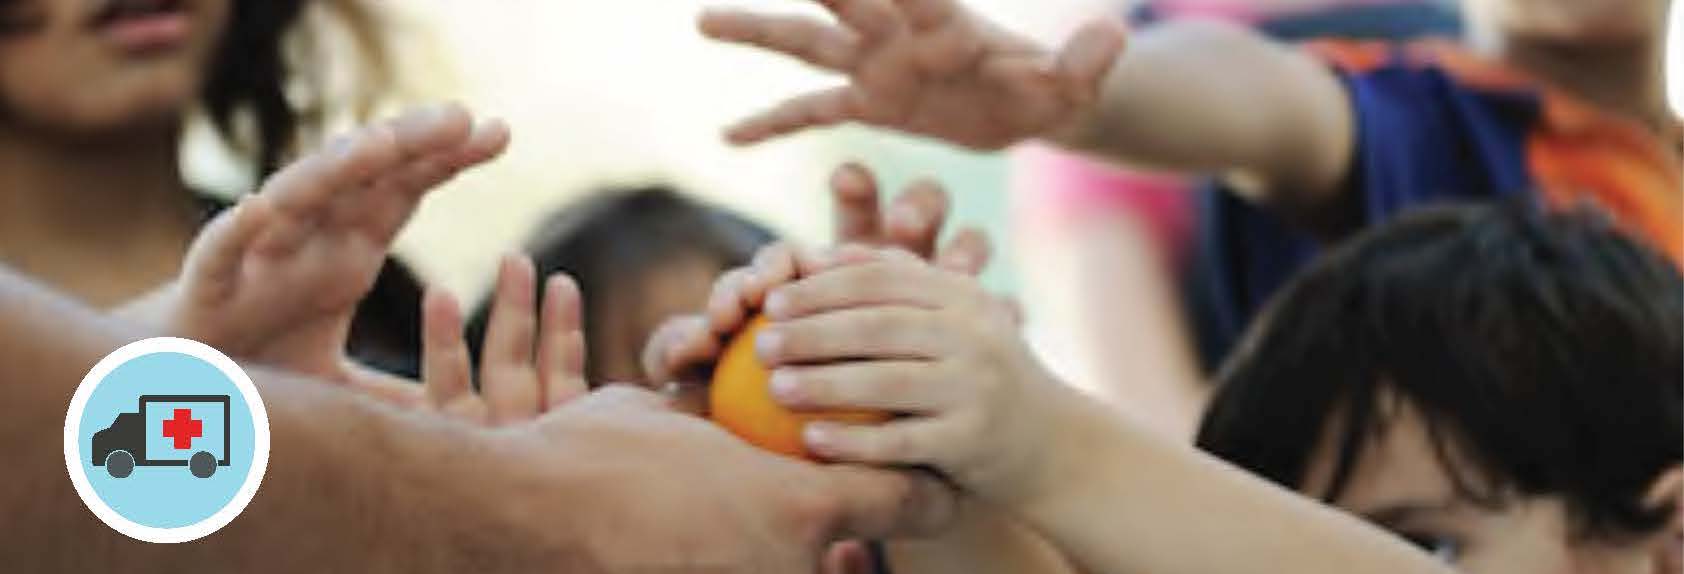 hands distributing oranges in a food distribution